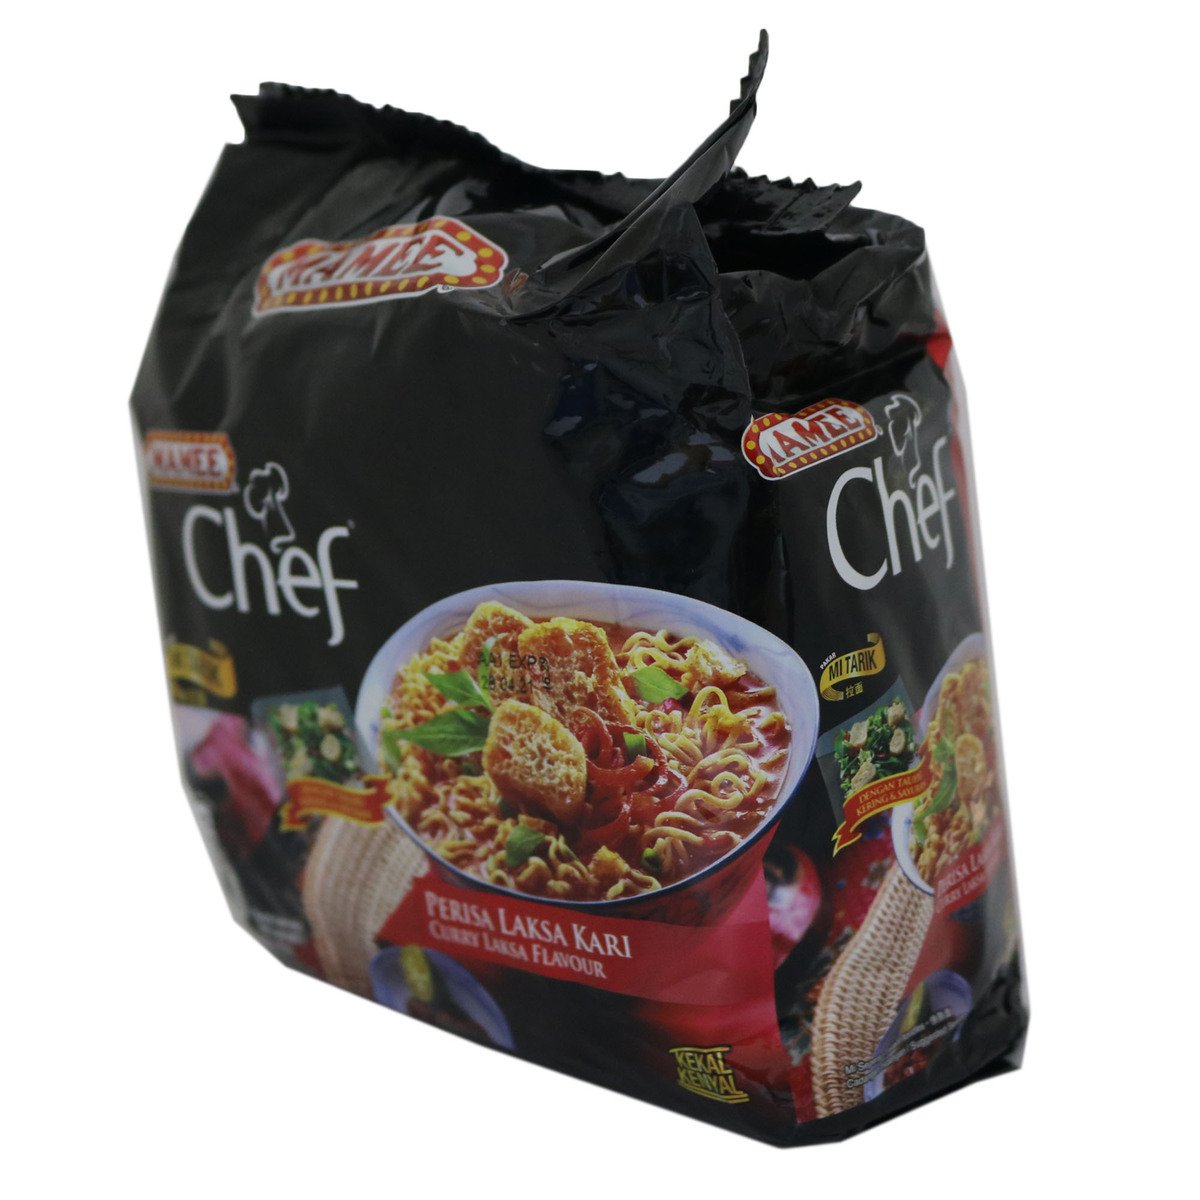 Mamee Chef Curry Laksa 4 x 95g